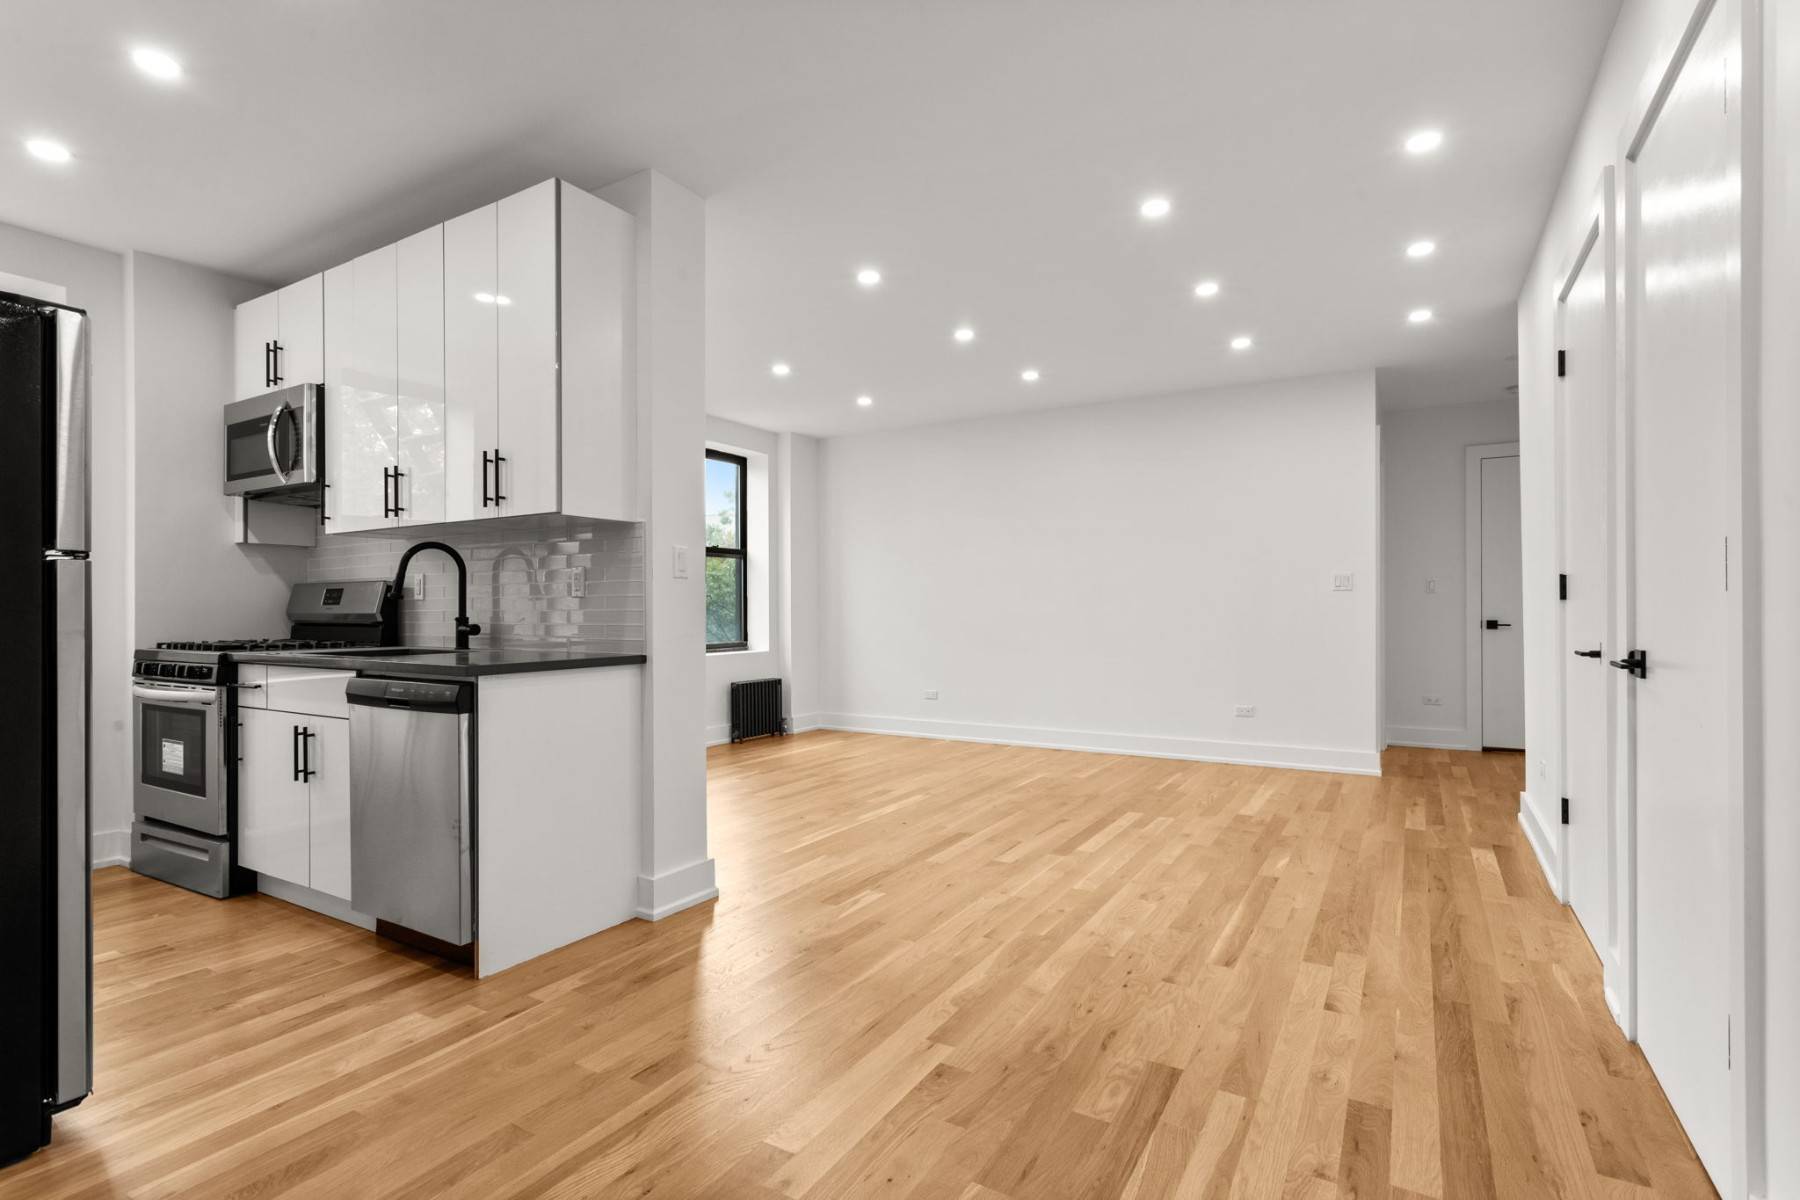 Welcome to Astoria33, the newest pre war condominium conversion project in one of the citys most vibrant communities.